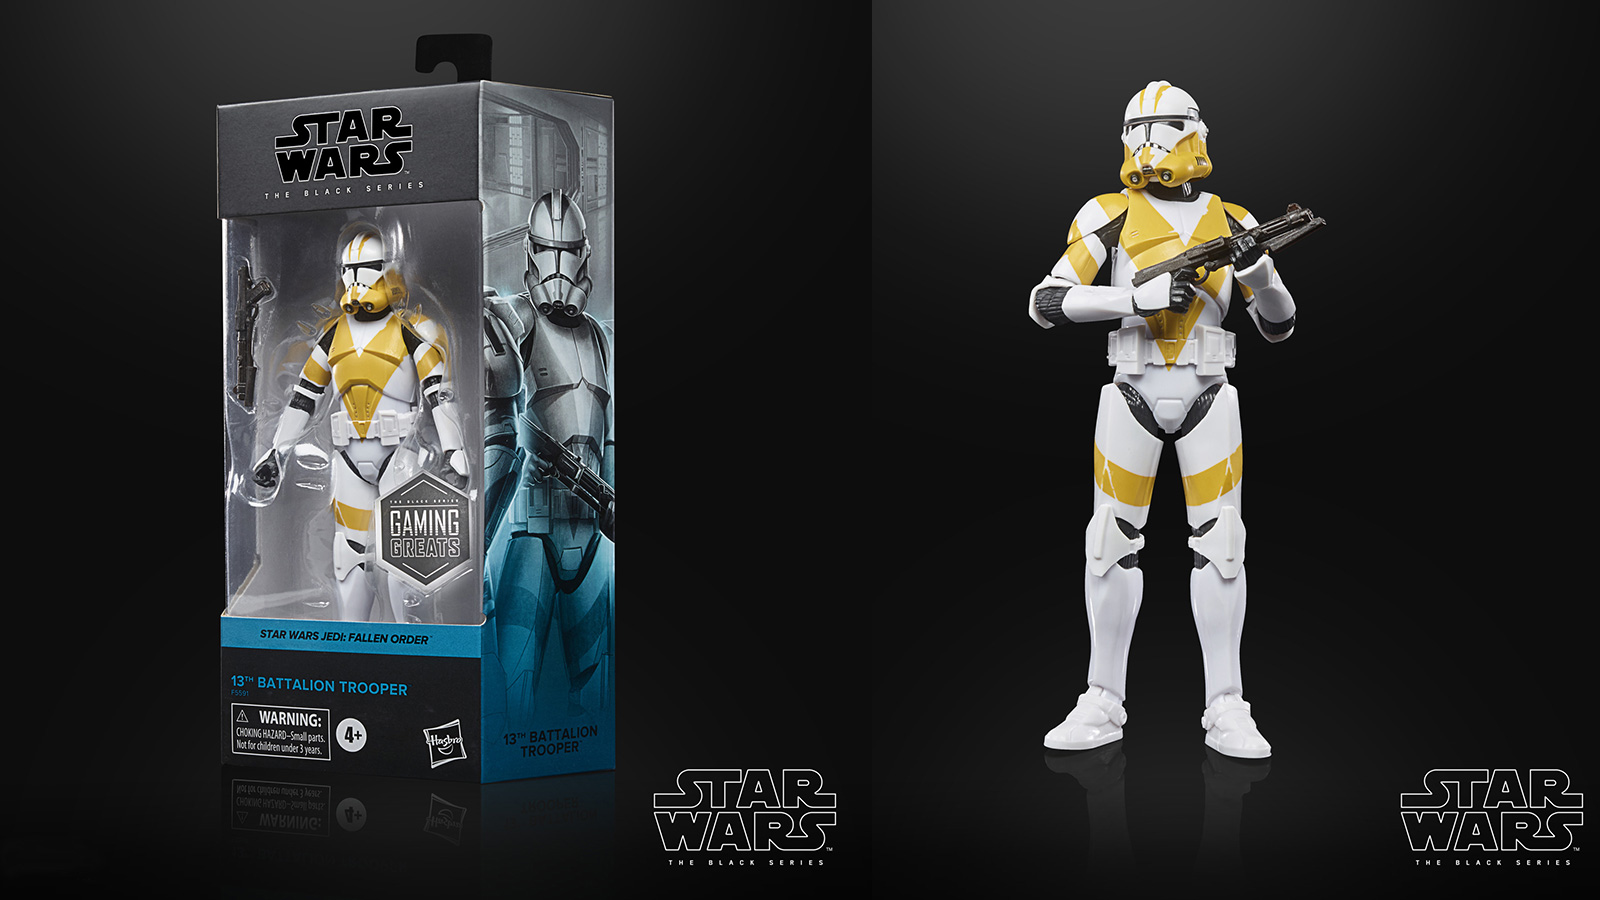 Preorder At Entertainment Earth - Exclusive TBS 6-Inch 13th Battalion Trooper Figure